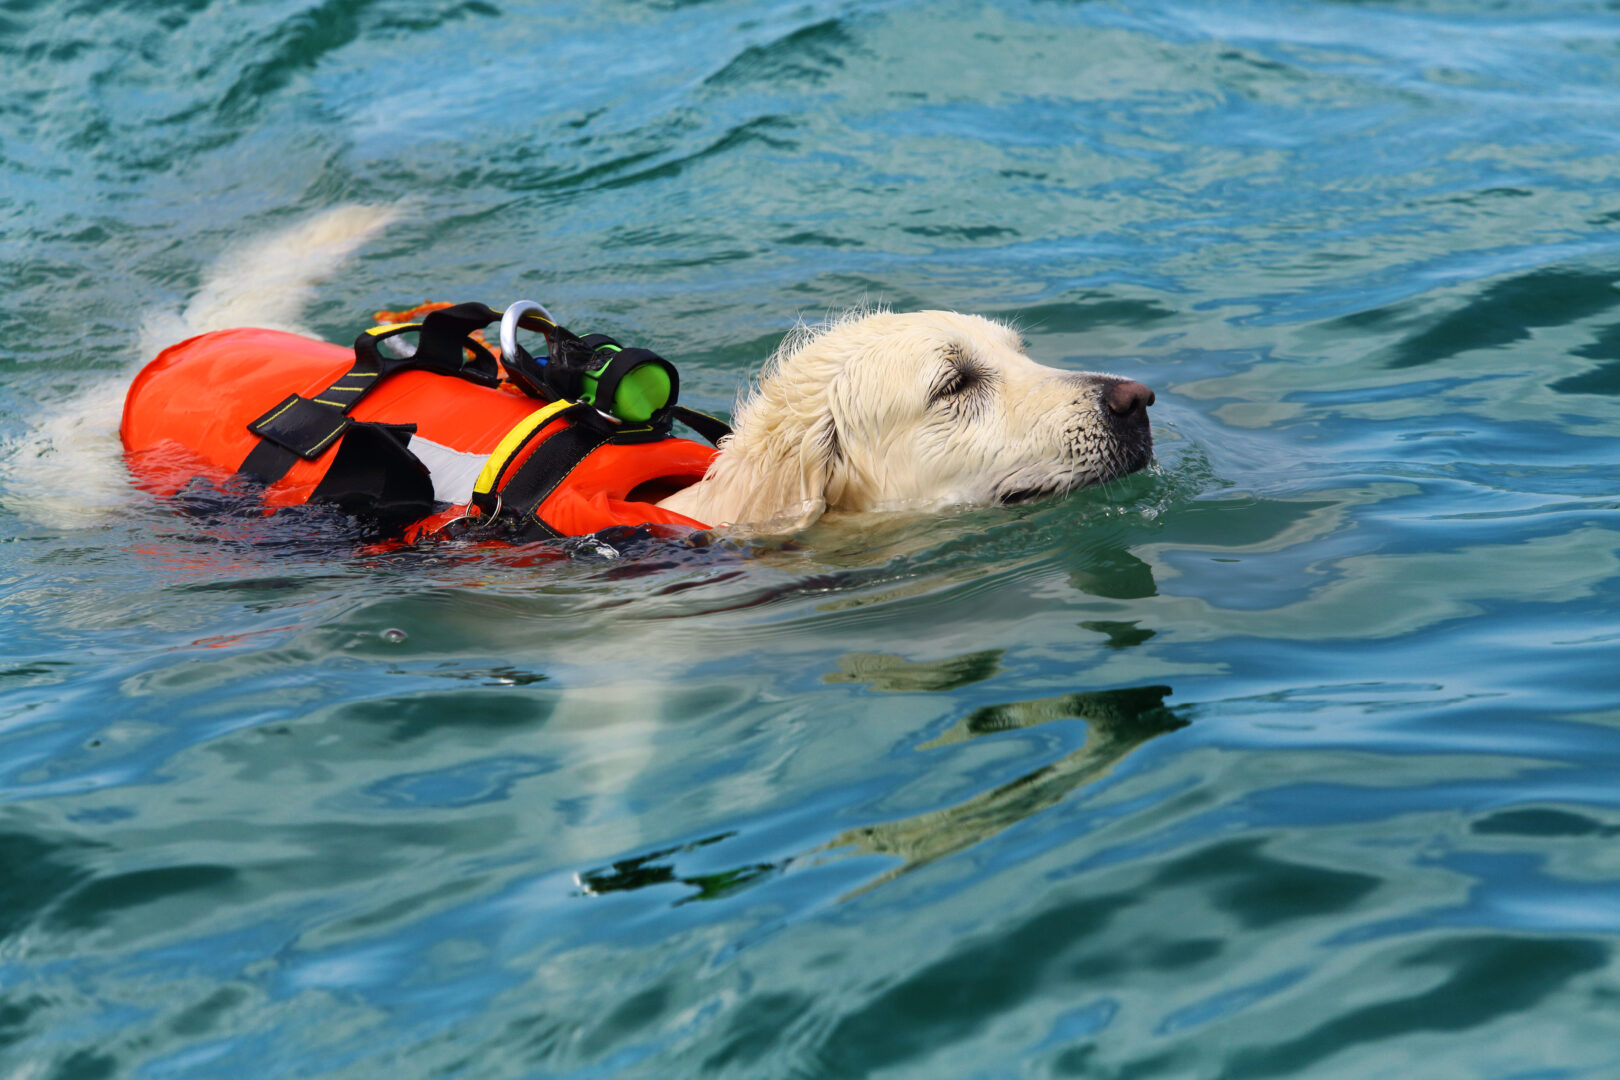 Labrador retriever with life jacket ready to rescue from the water.Other images in: